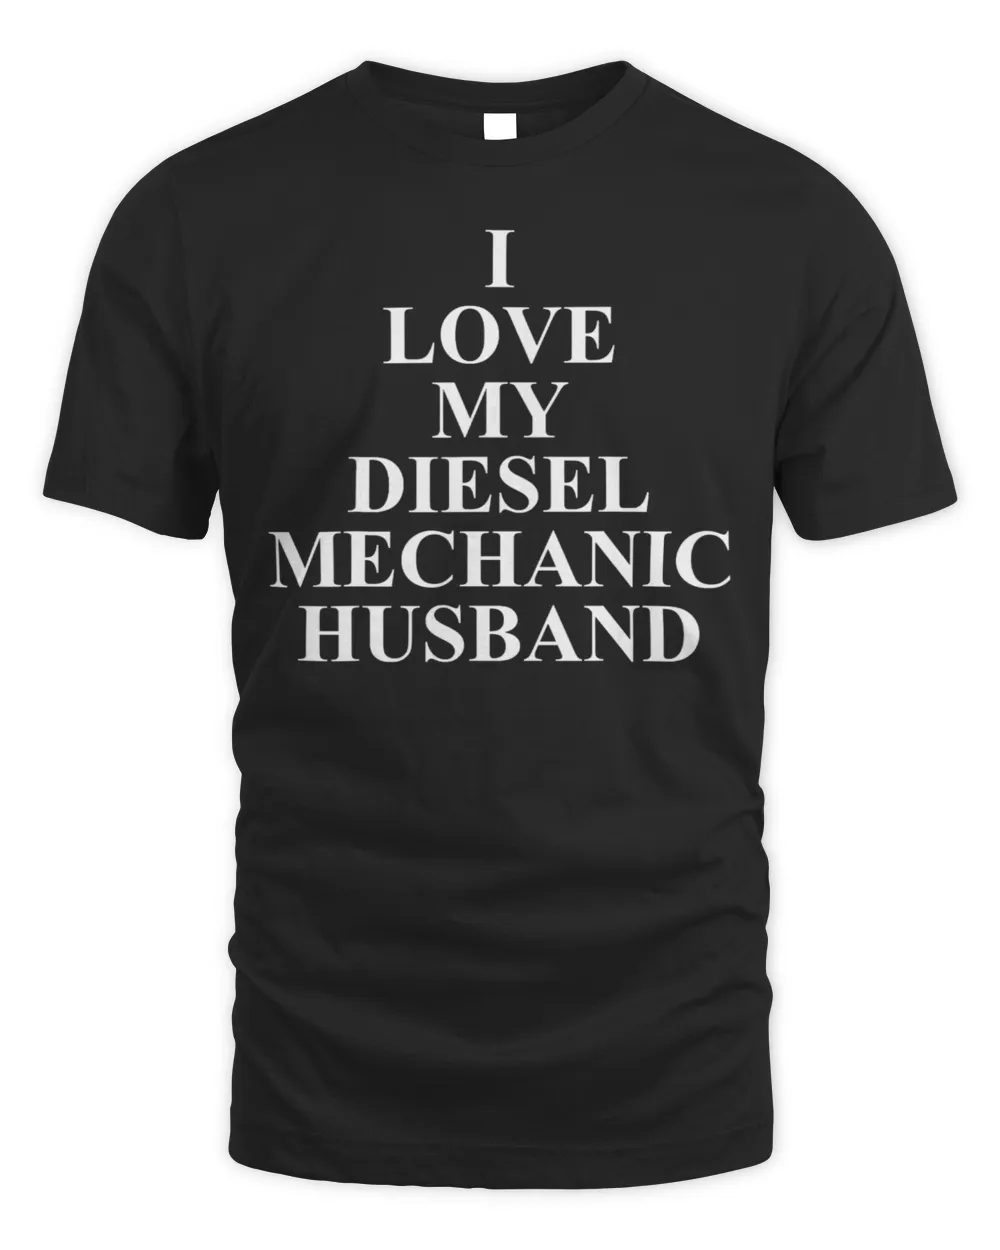 Diesel Mechanic Wife Apparel - Awesome Des